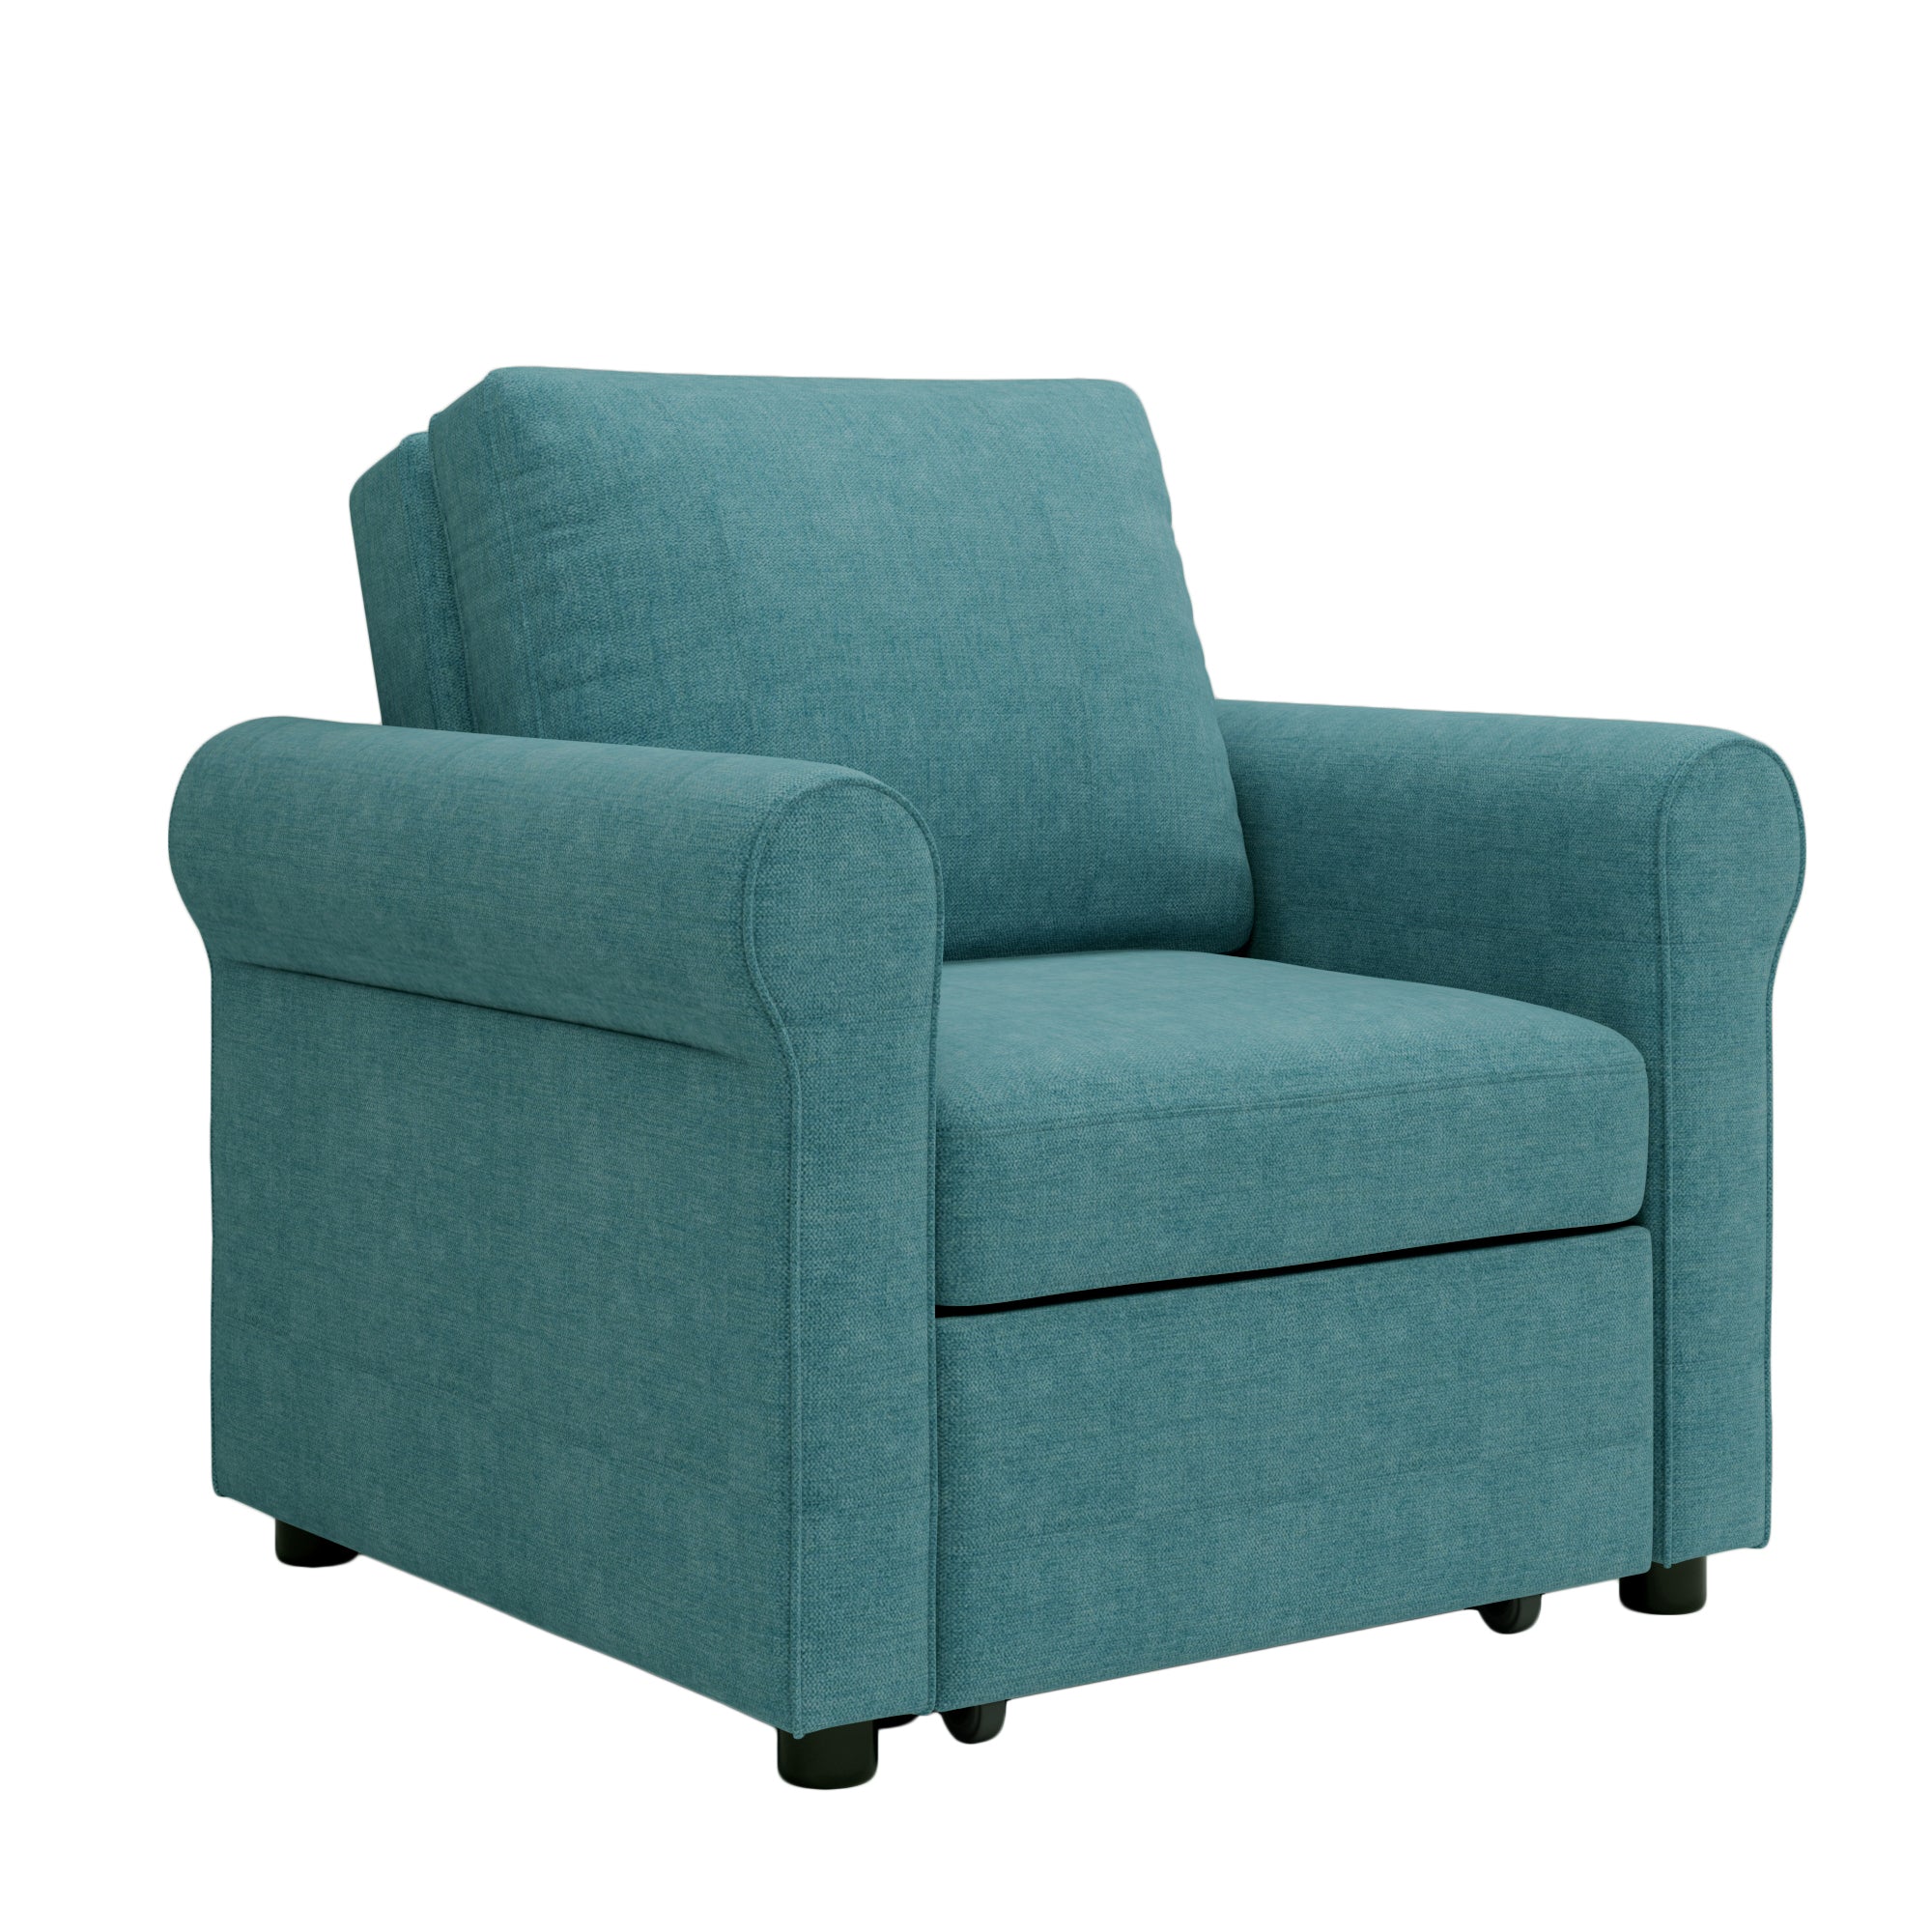 3 in 1 Sofa Bed Chair, Convertible Sleeper Chair teal-linen